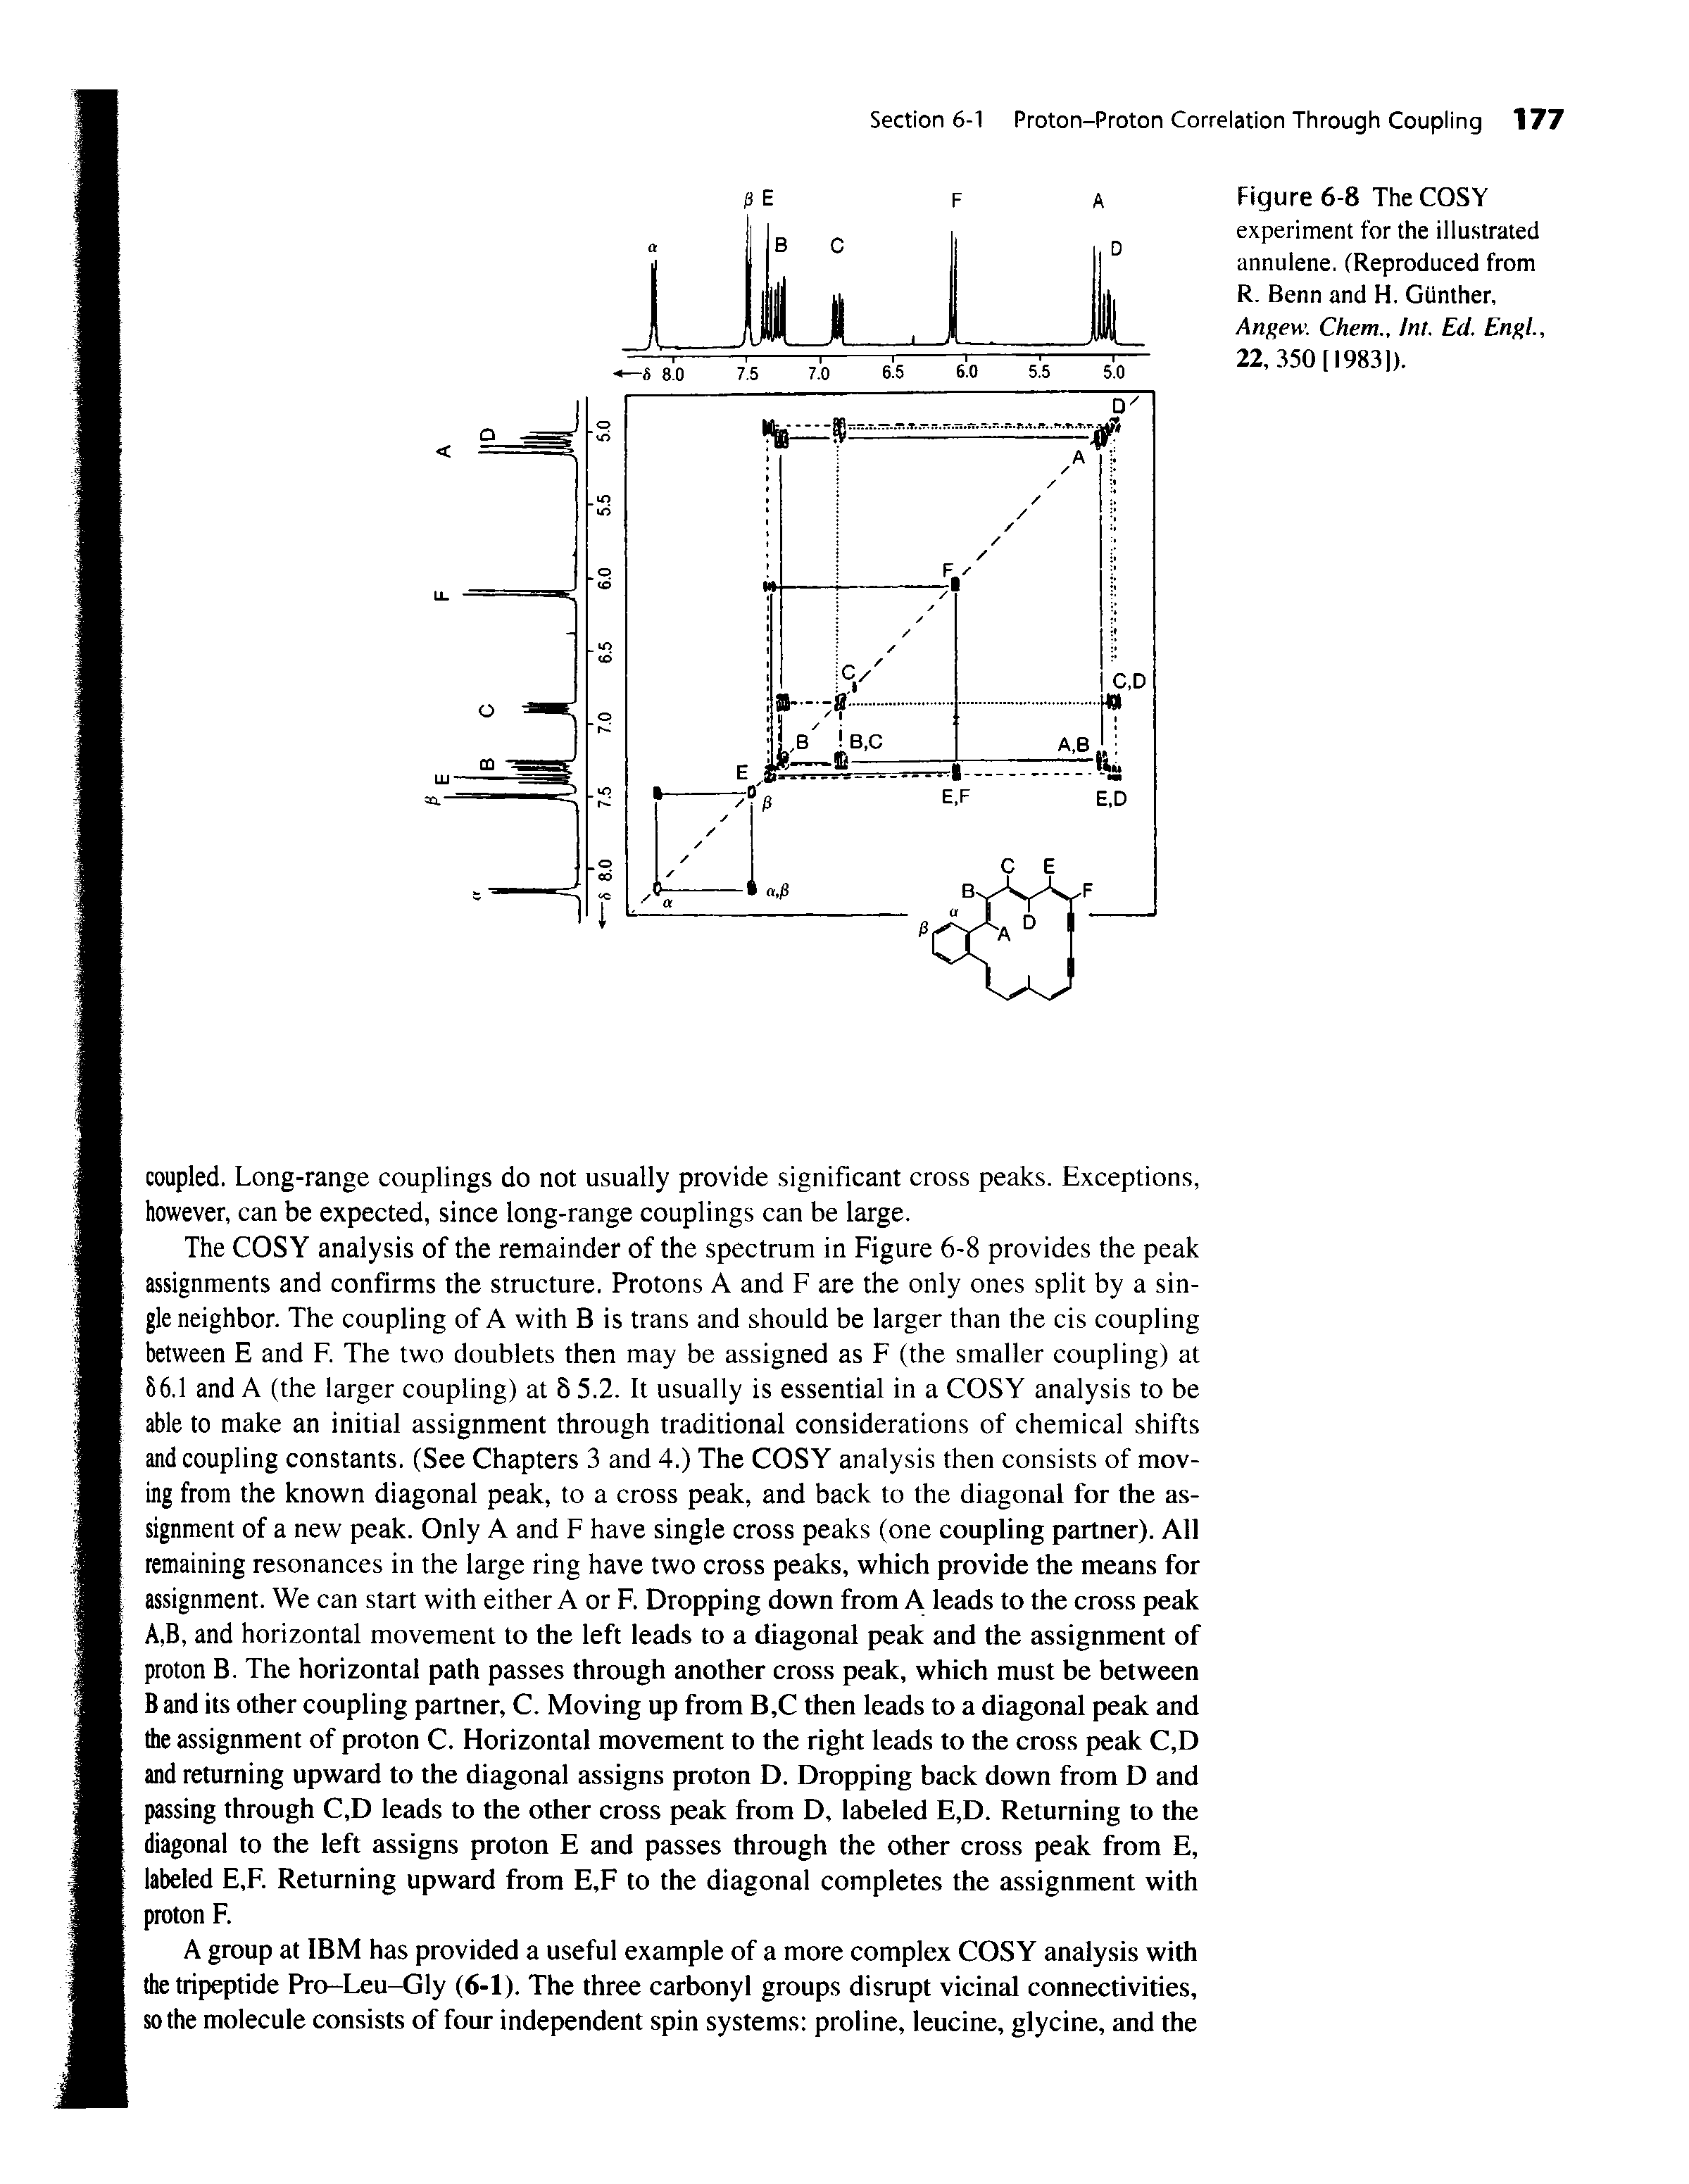 Figure 6-8 The COSY experiment for the illustrated annulene. (Reproduced from R. Benn and H. Gunther, Angew. Chem., Jnt. Ed. Engl, 22, 350(19831).